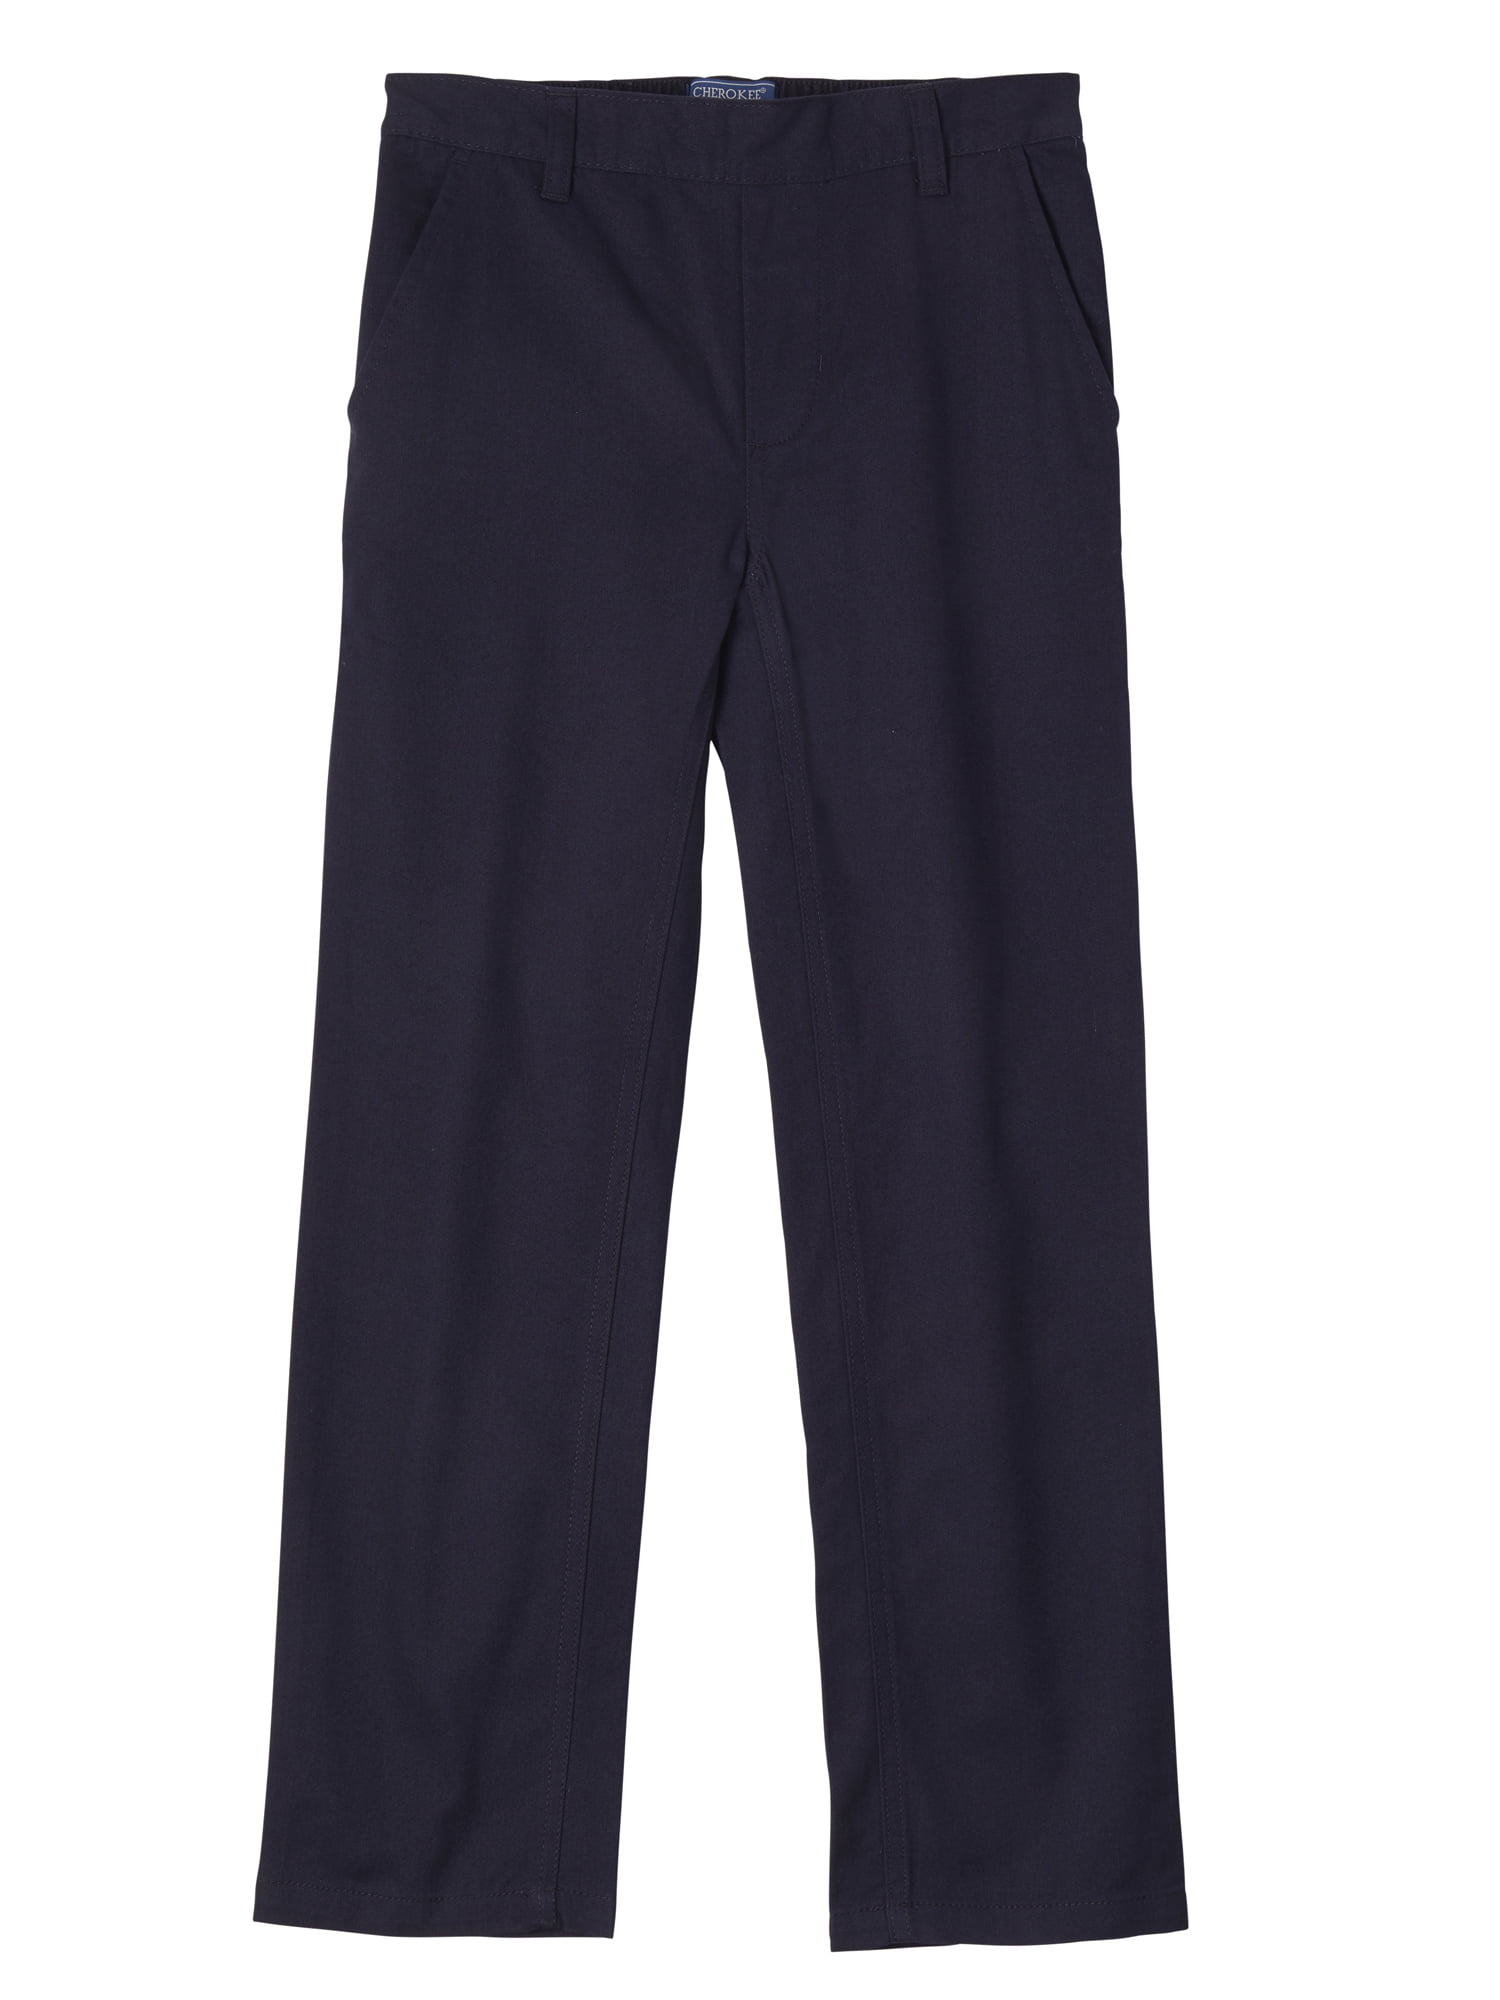 CHEROKEE Boys Uniform Relaxed-fit Twill Pull On Pant 